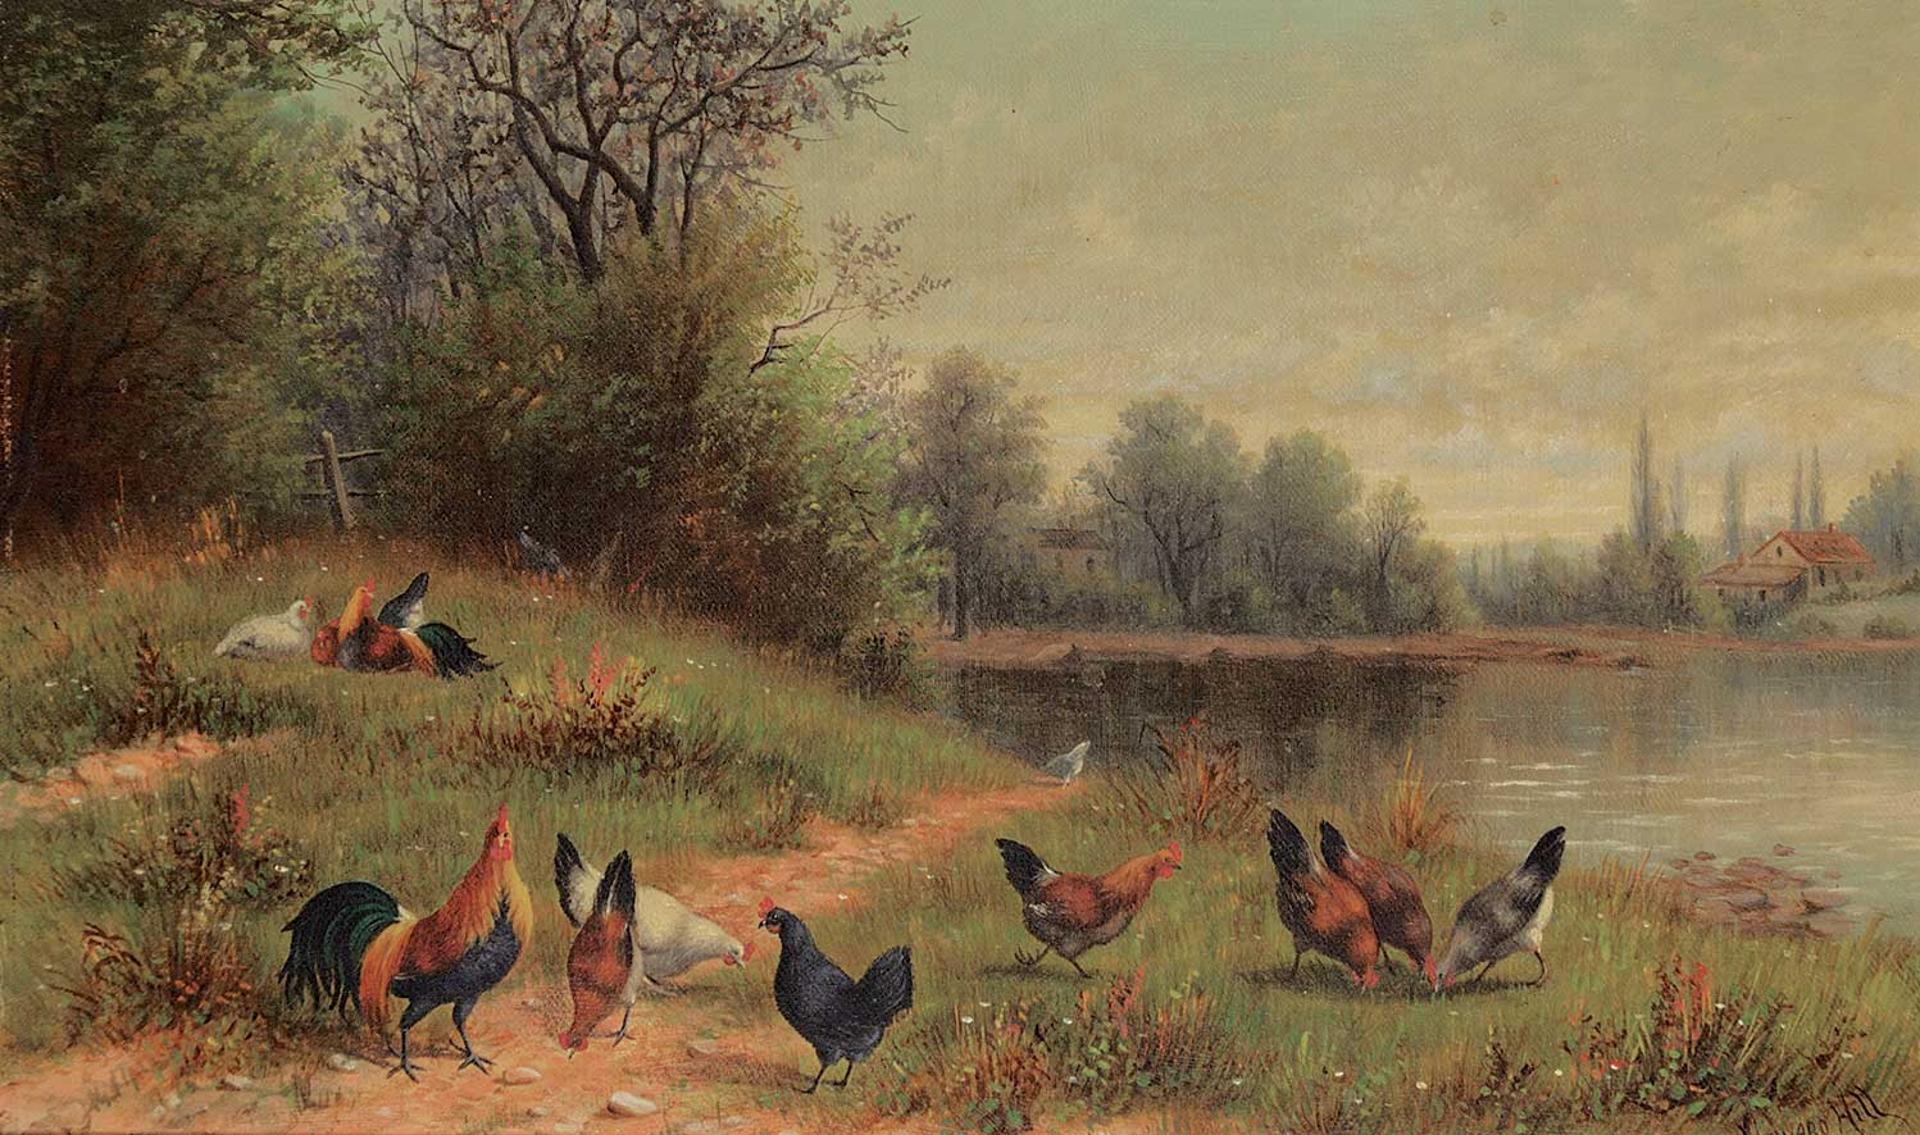 Howard L. Hill - Untitled - Chickens